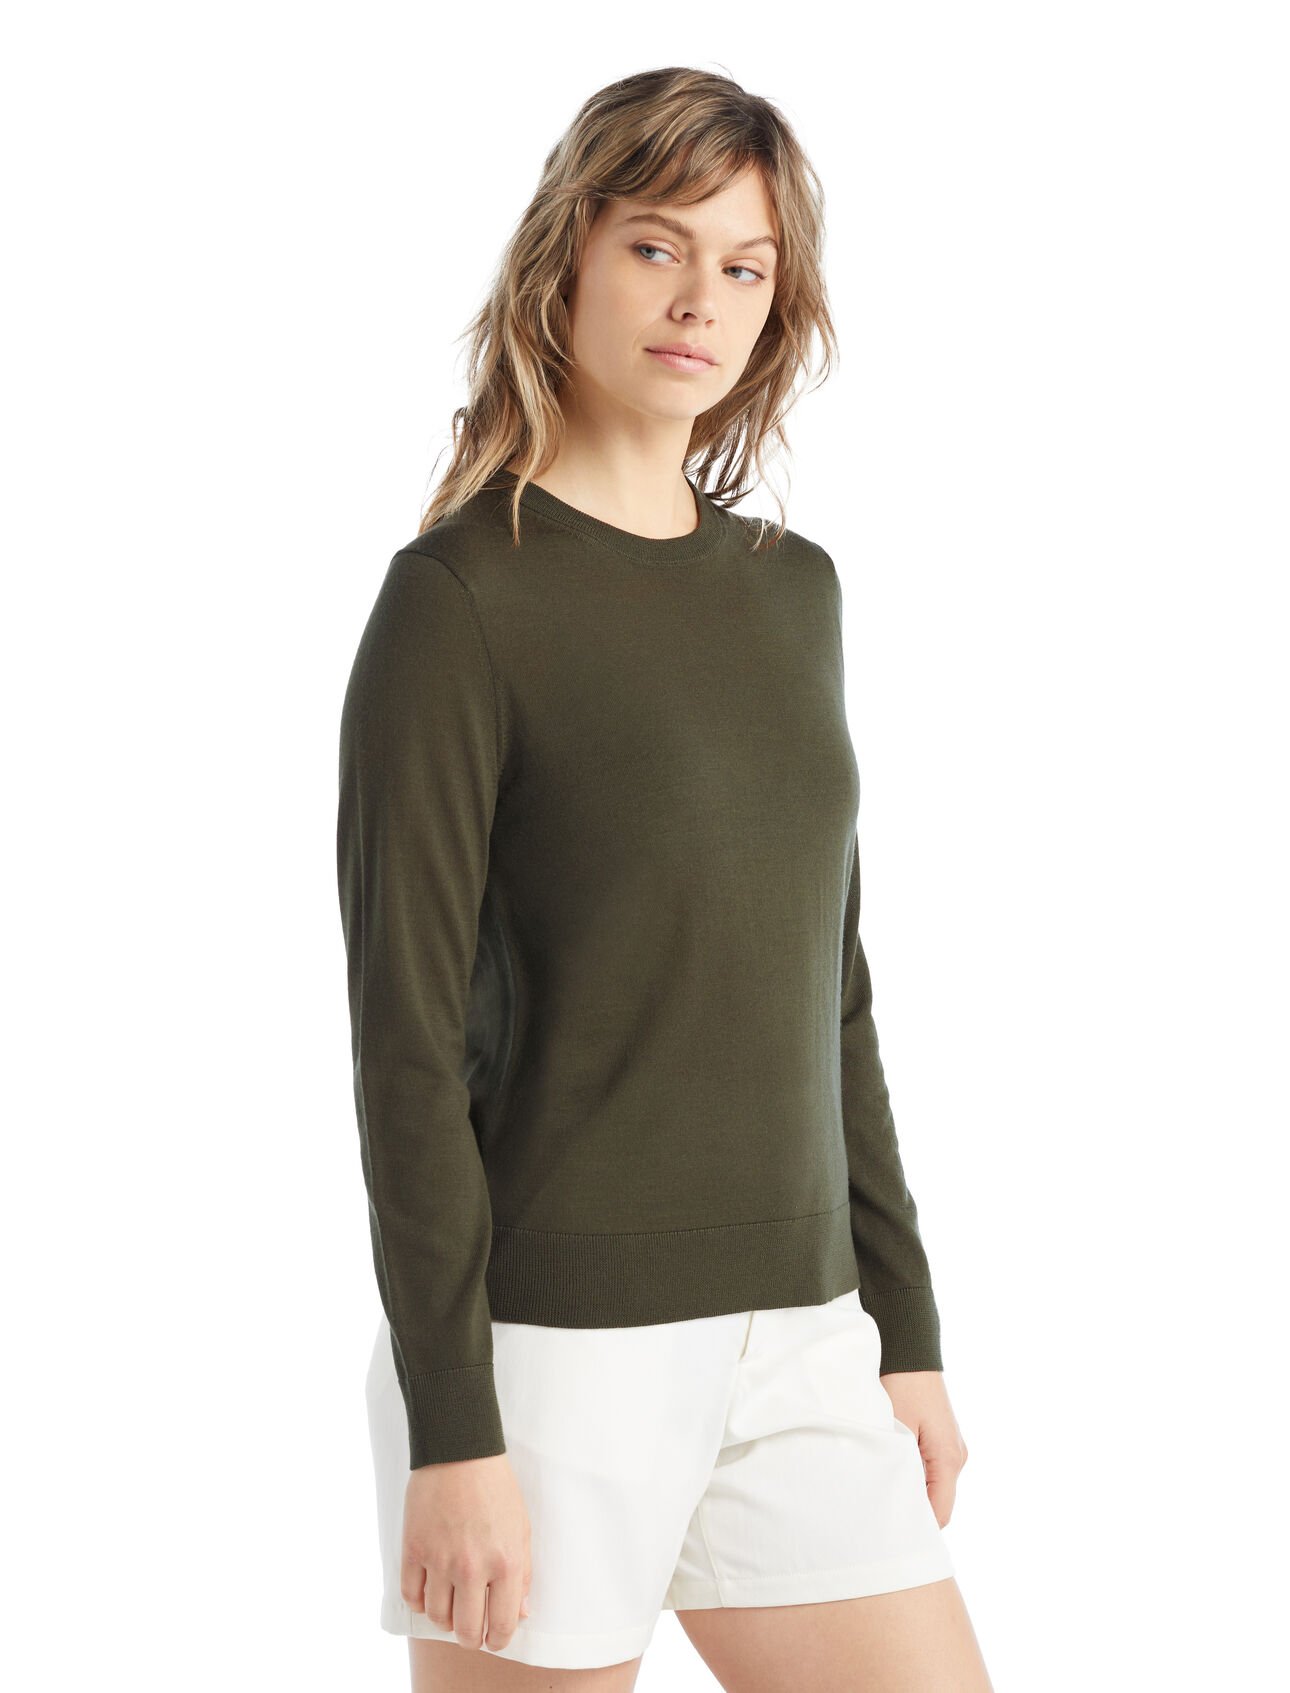 Womens Merino Wilcox Merino Long Sleeve Sweater  A classic everyday sweater made with ultra-fine gauge merino wool for unparalleled softness, the Wilcox Long Sleeve Sweater is perfect for days when you need a light extra layer.